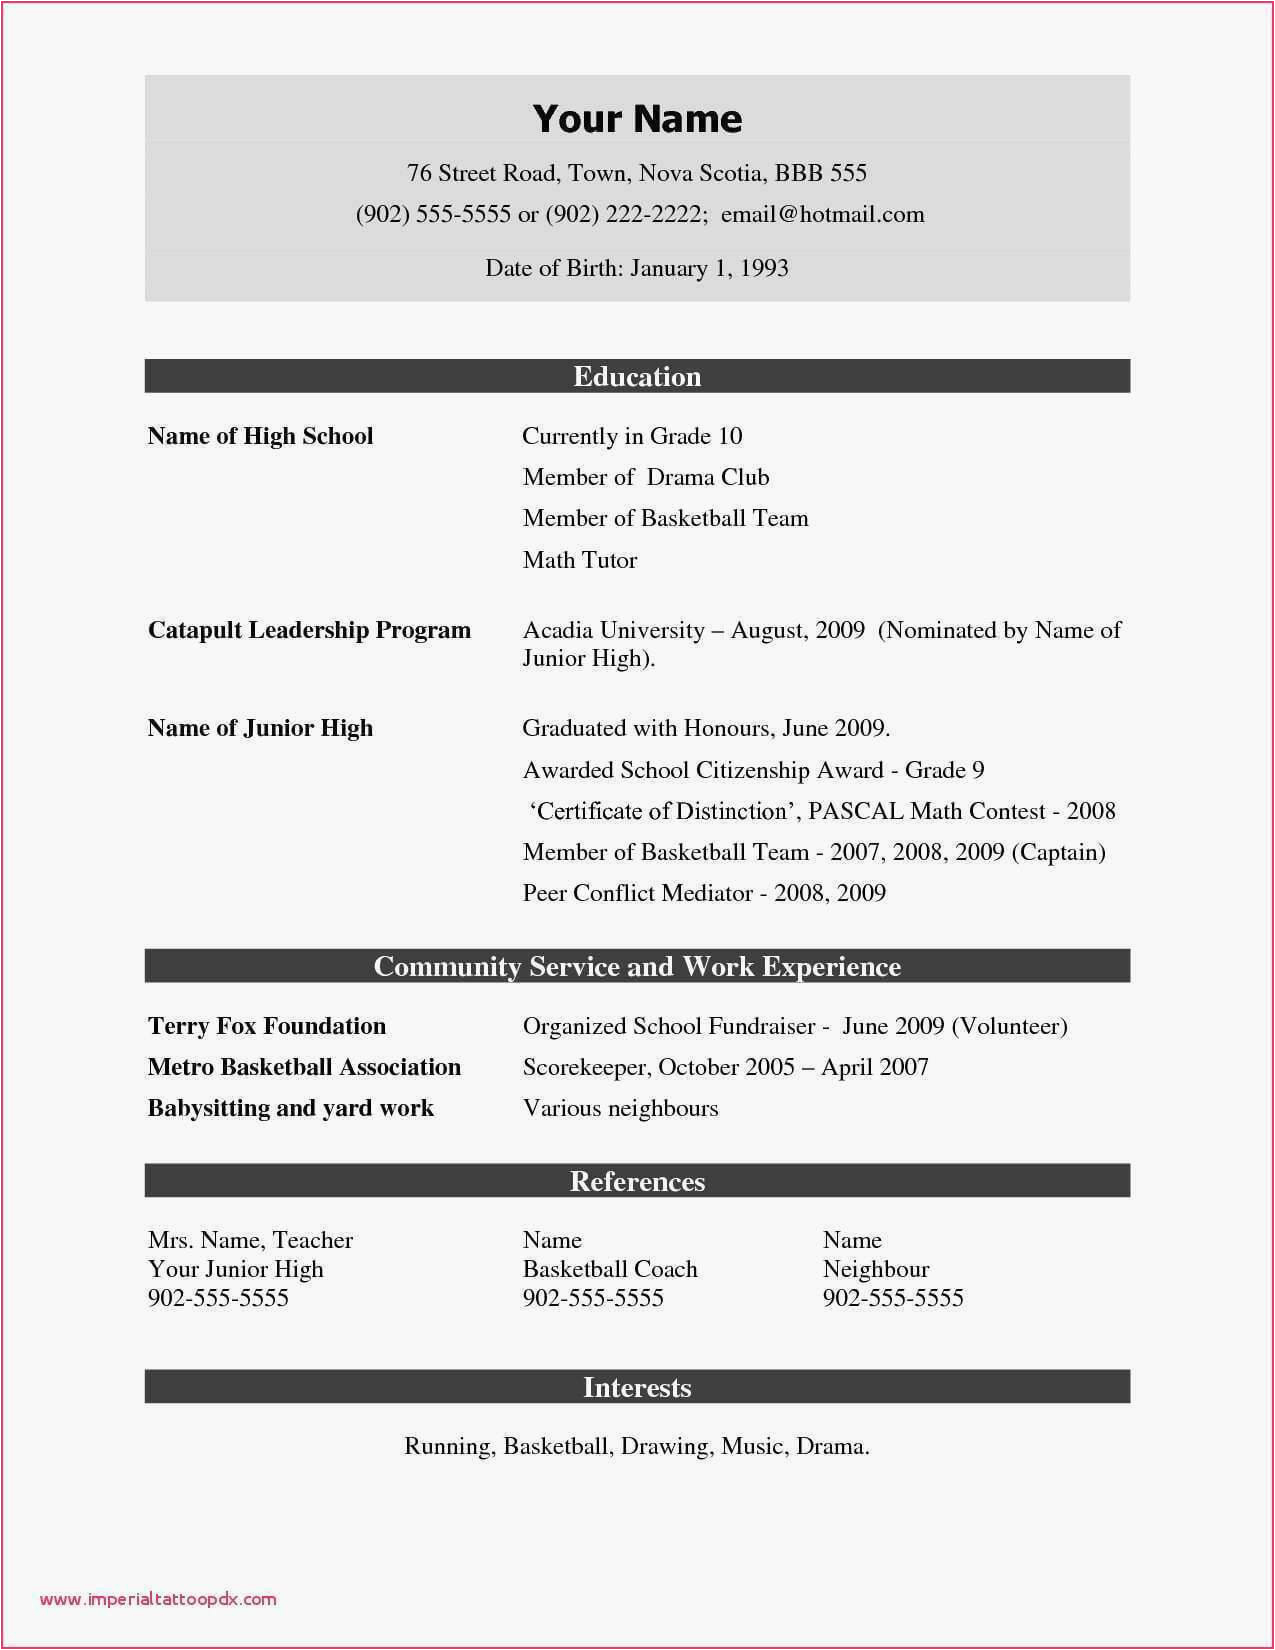 Simple Resume Template with Picture Free Download 029 Simple Resume Template for Students Free Download